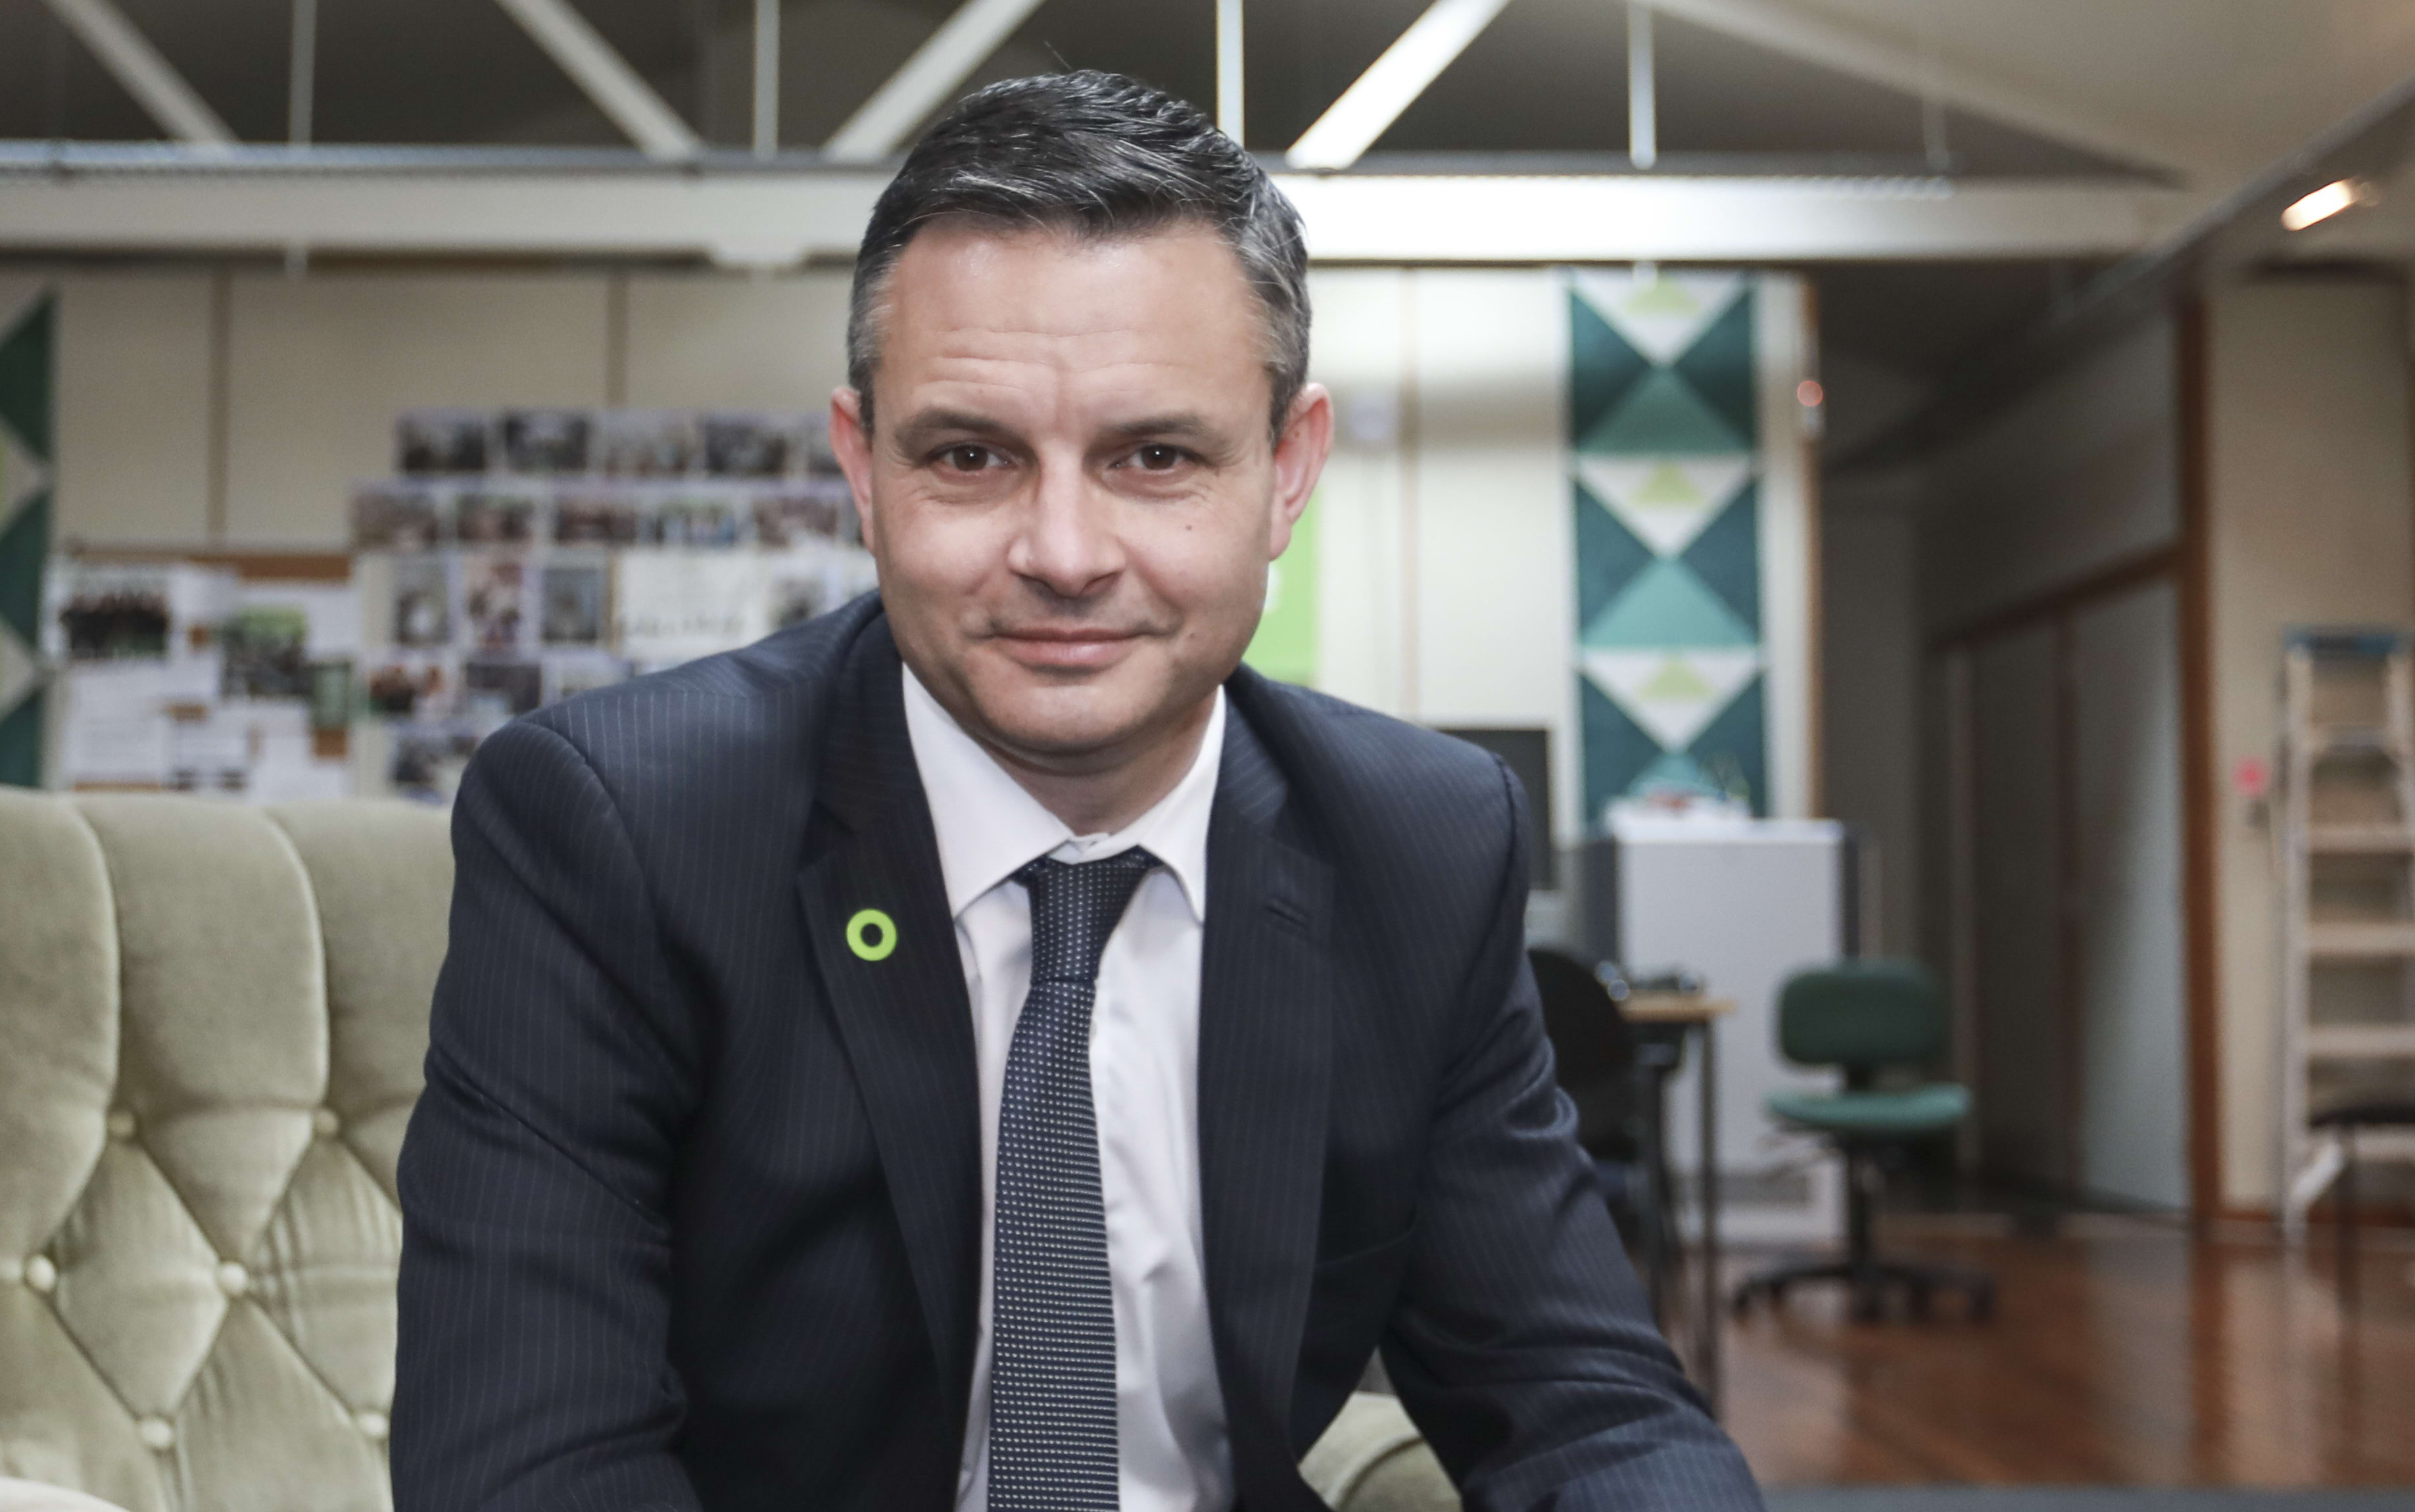 James Shaw at the Greens headquarters in Auckland.